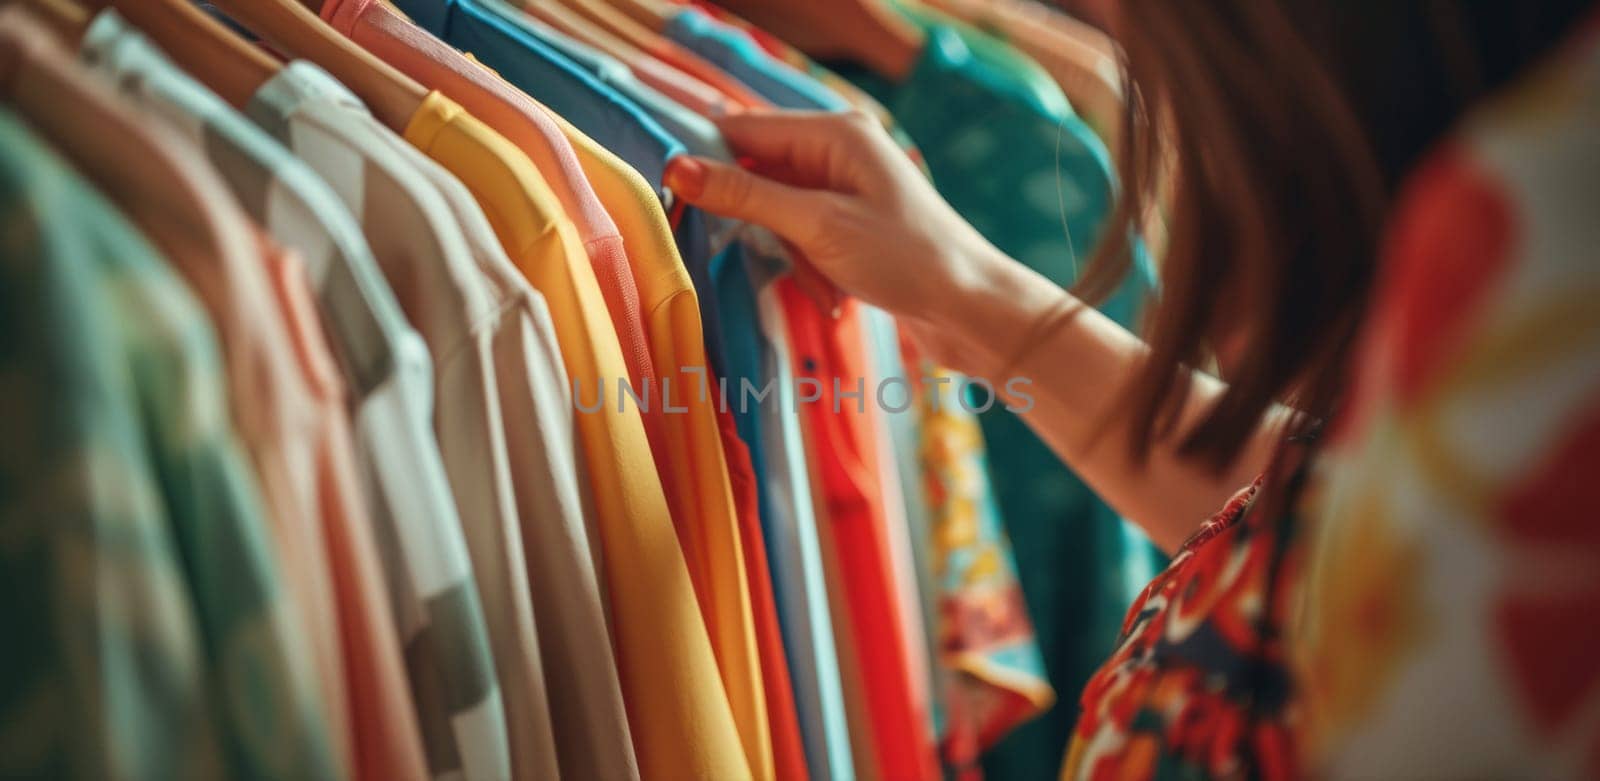 A woman looking at a rack of colorful shirts on hangers, AI by starush